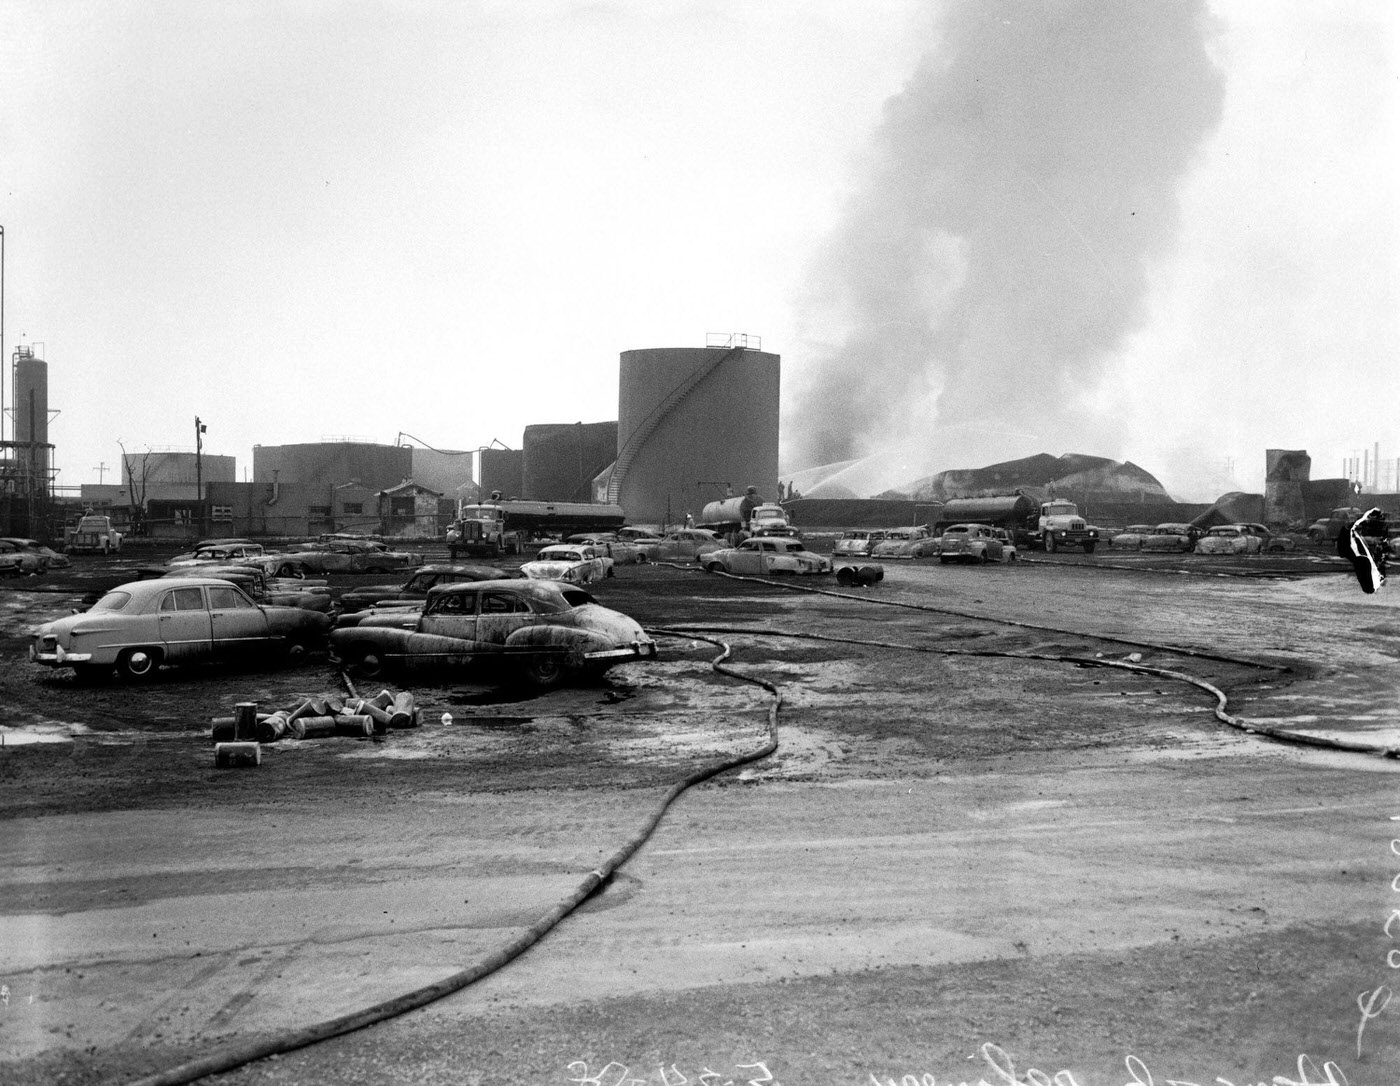 Hancock Oil Fire Clean-Up, Foamite and Water Sprays in Action, 1958